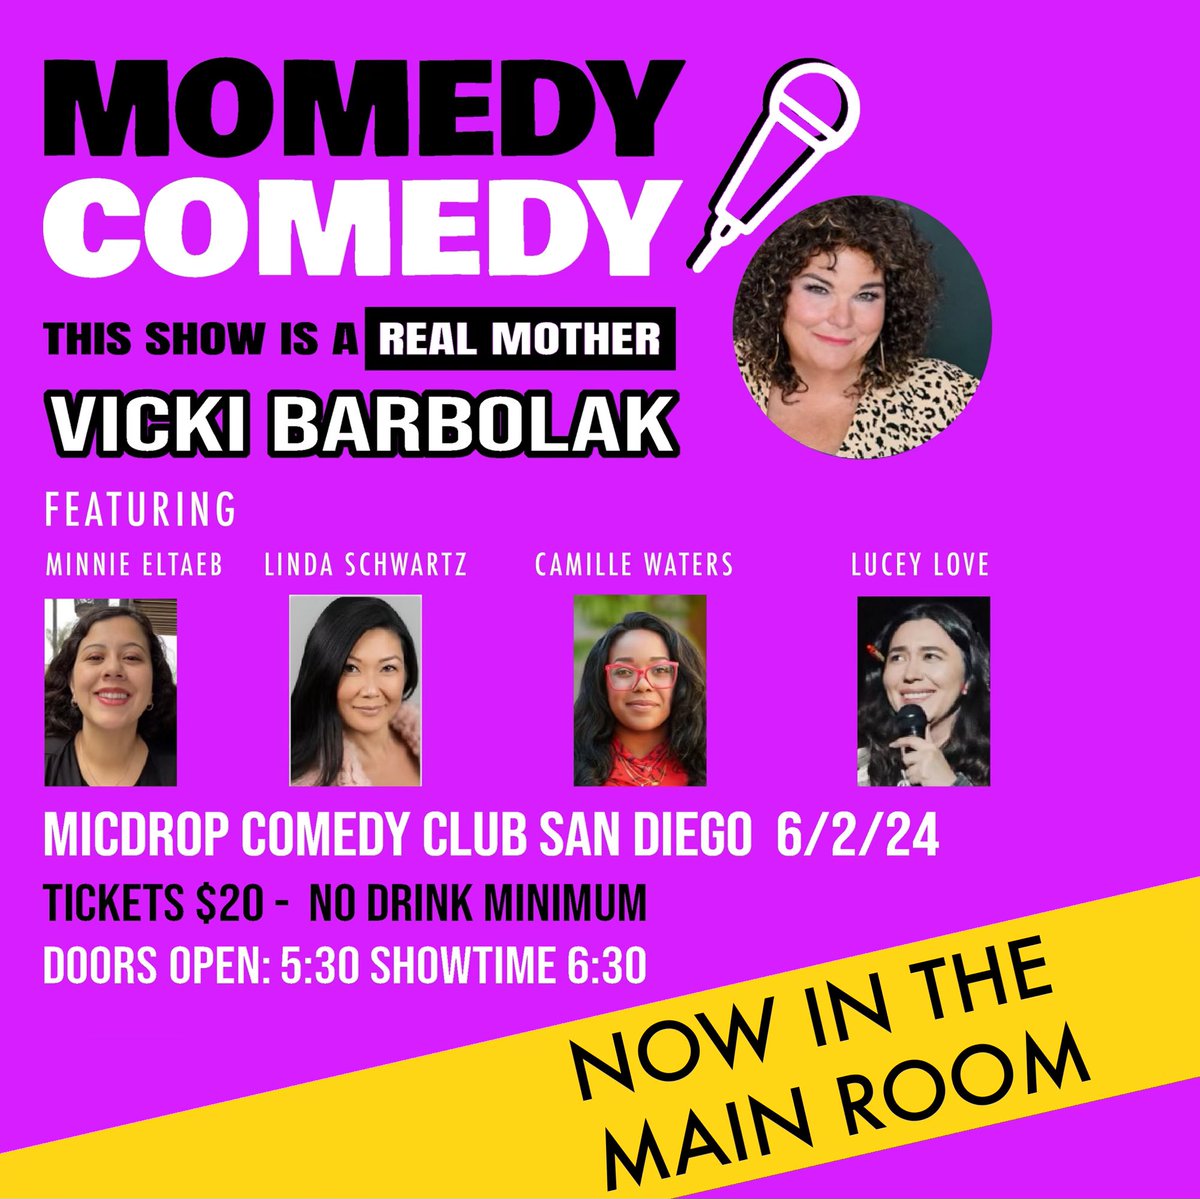 My daughter’s first stand up show she’s organized. They sold out the regular room and had to move it to the main room. Get tickets now! micdropcomedy.com/shows/254410